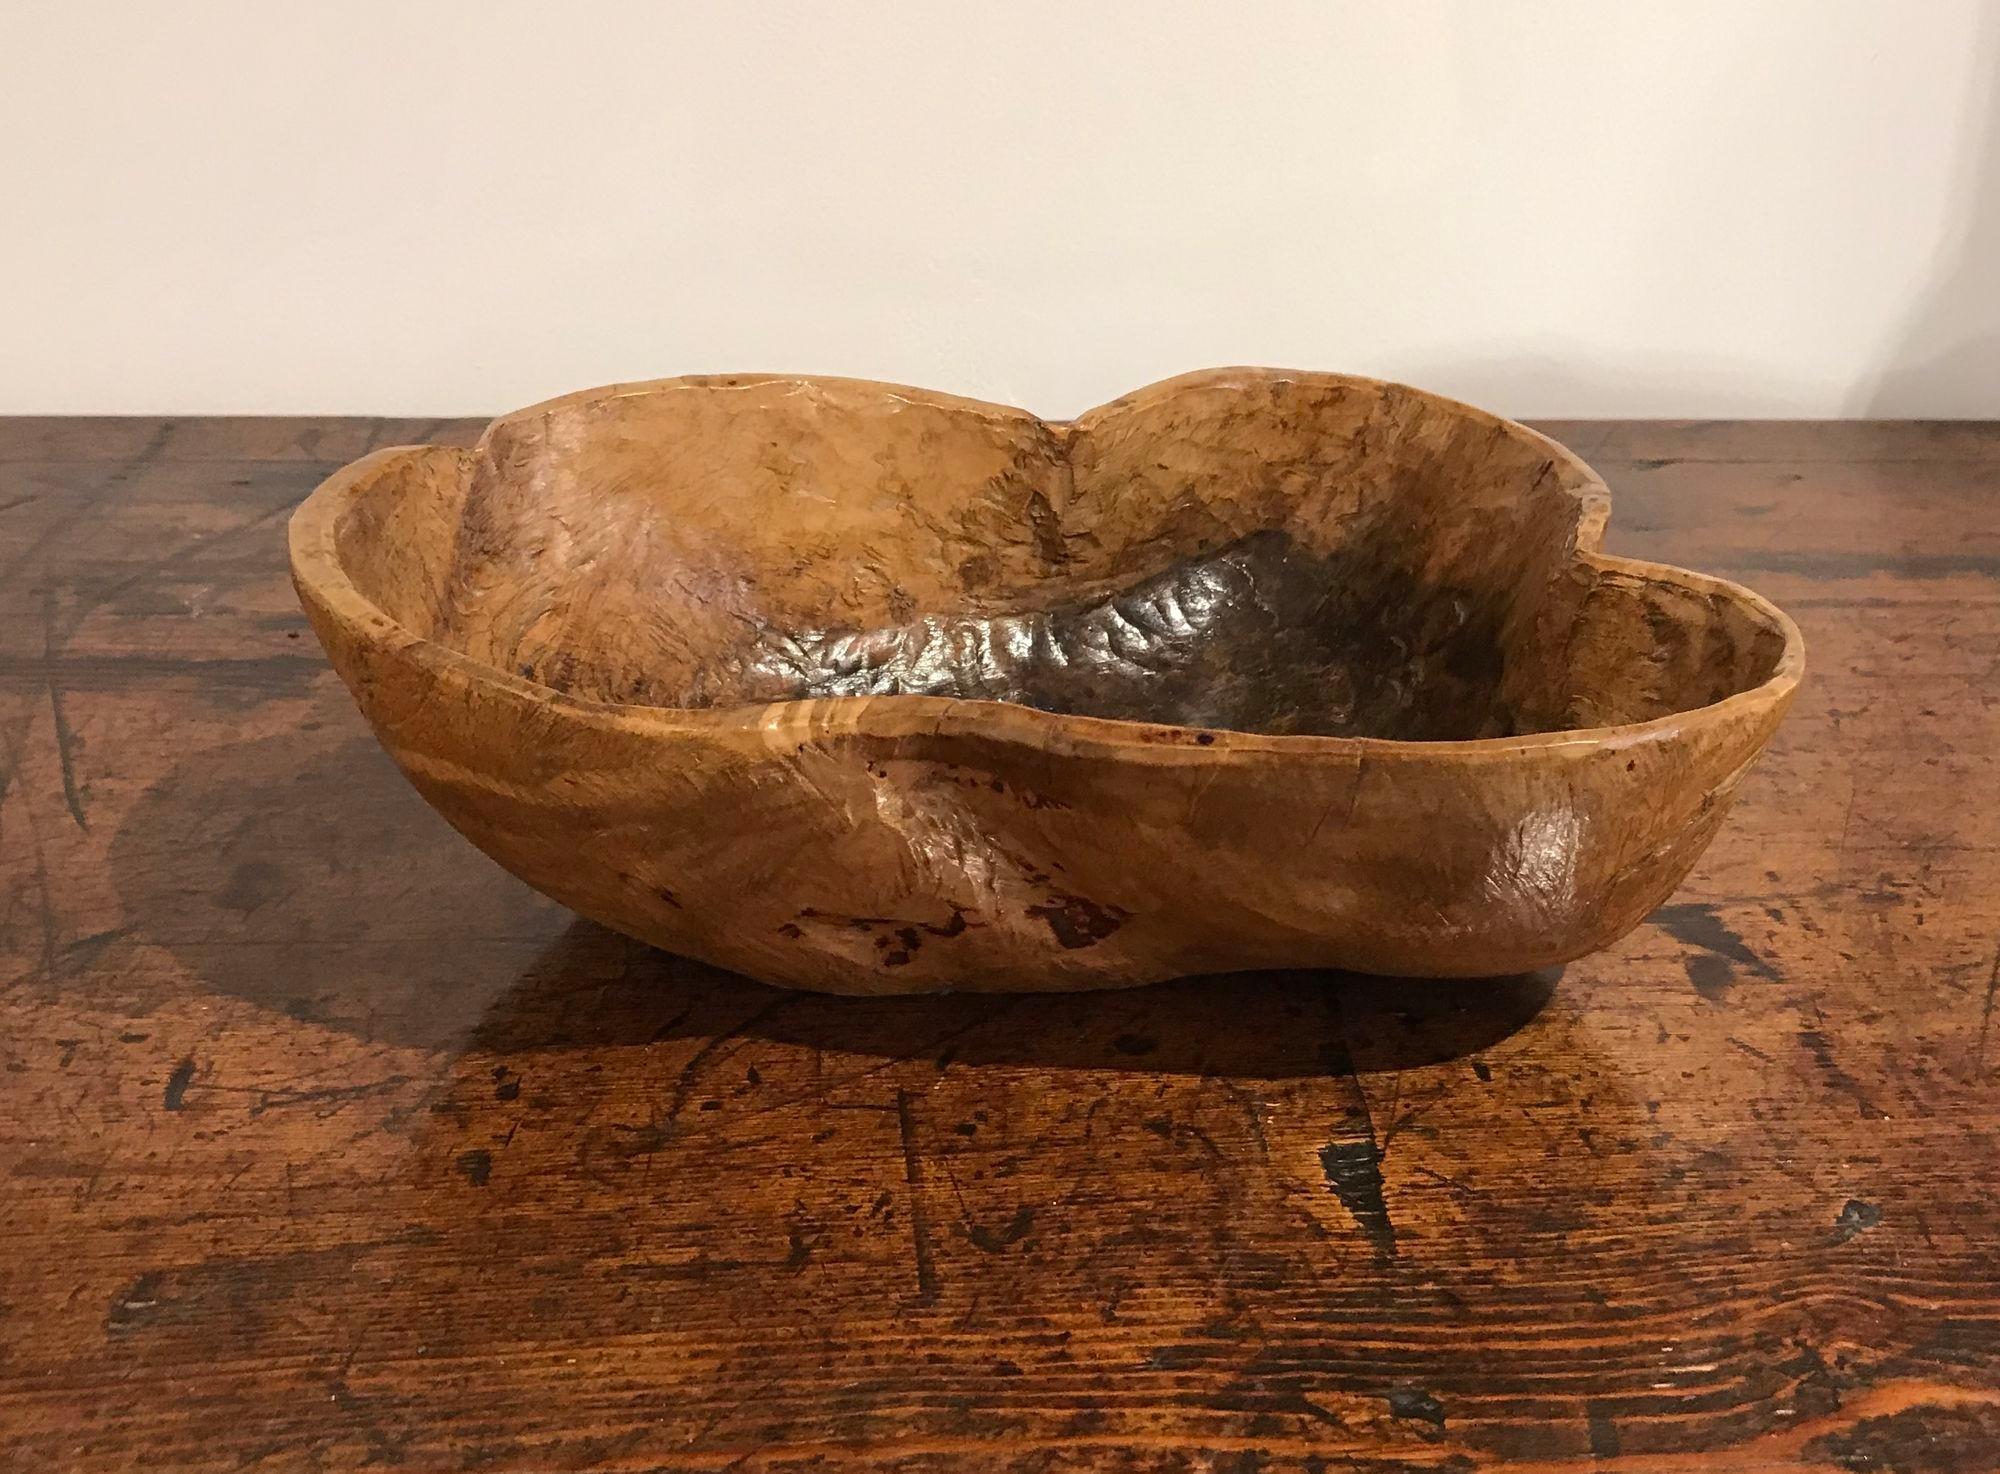 fine Swedish early 19th century birch root burl bowl of organic form and having a rich patina and unusual shape, the interior with black discoloration often associated with ale bowls.
Burls, the natural occurring growths found on many trees, are